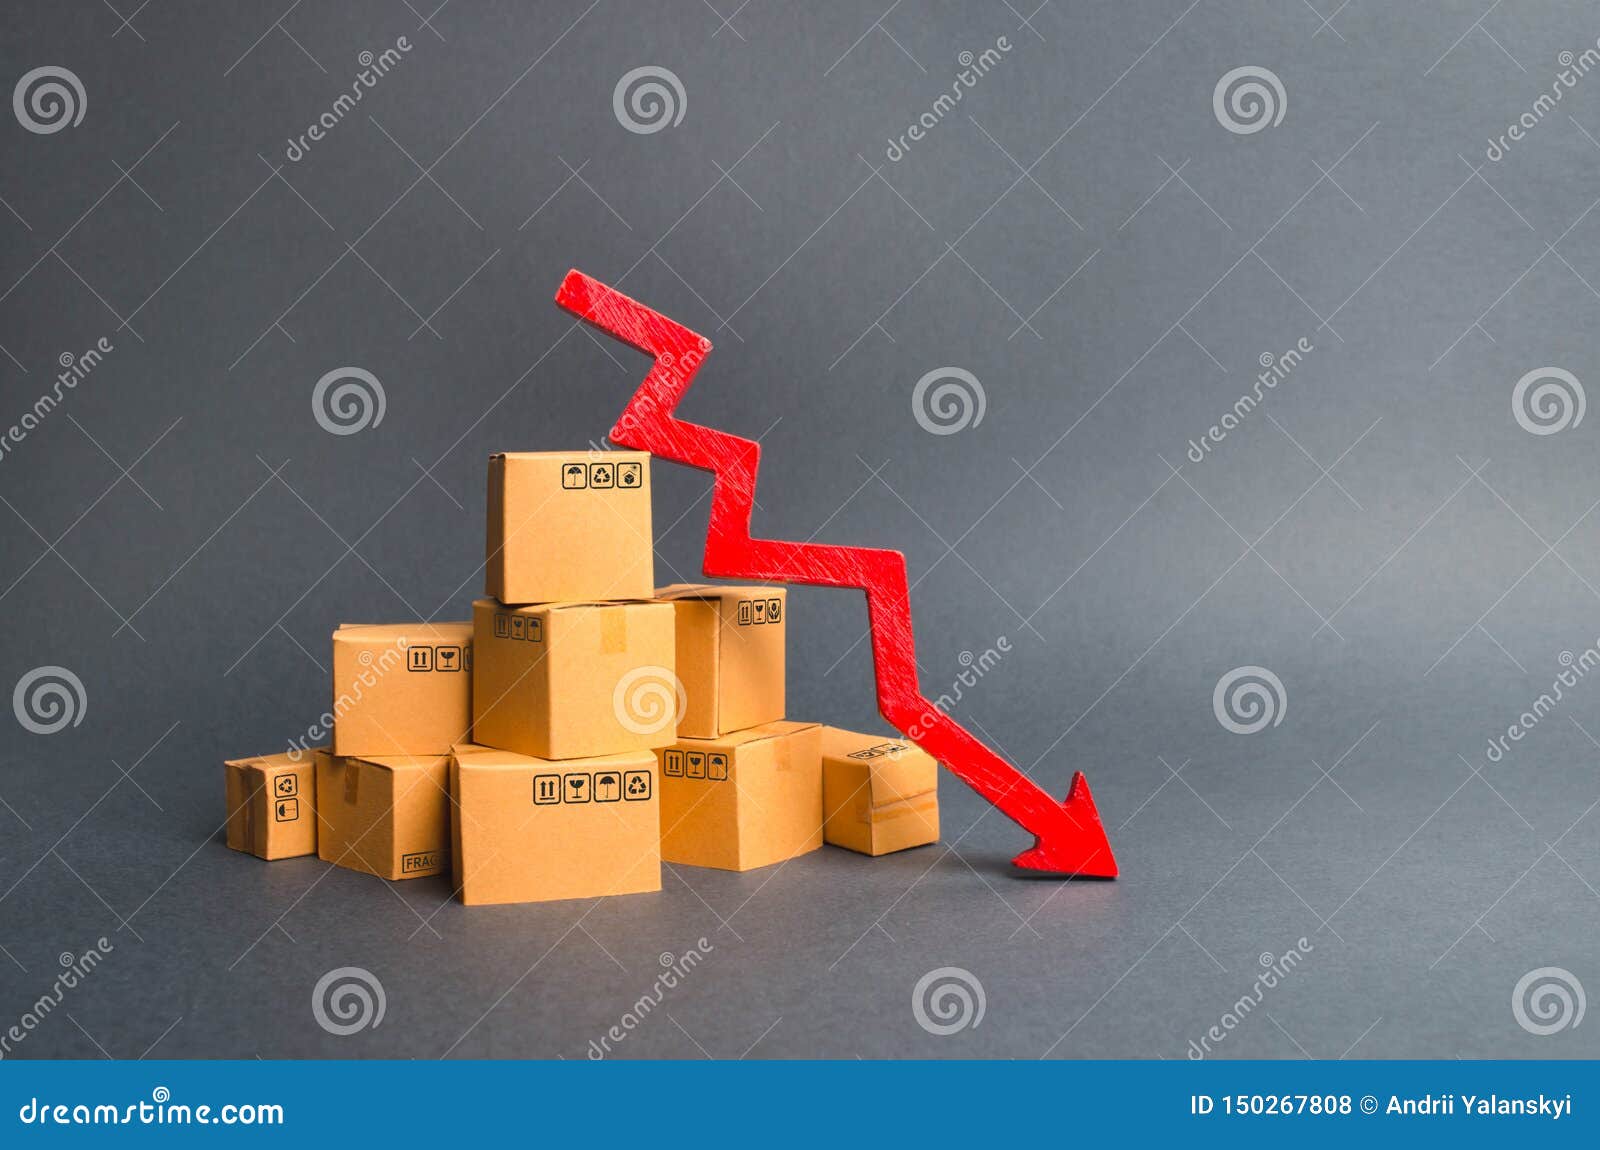 a pile of cardboard boxes and a red arrow down. the decline in the production of goods and products, the economic downturn